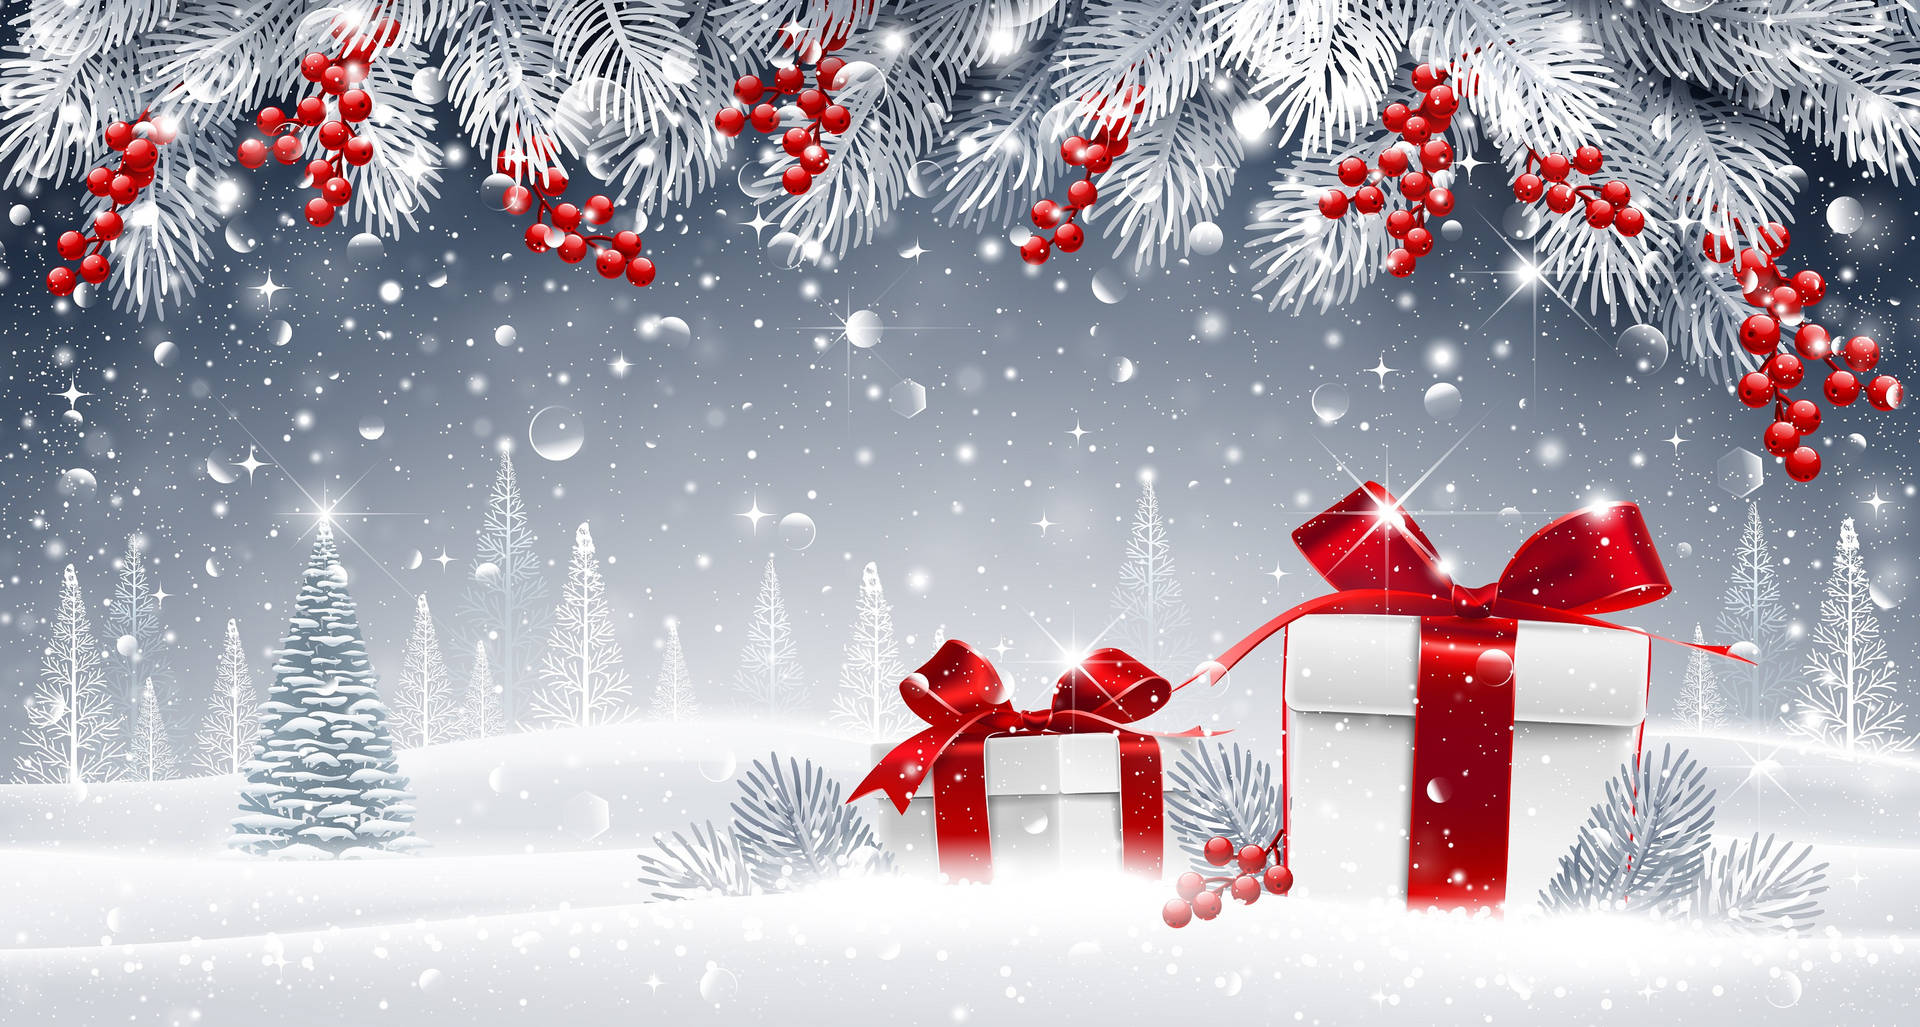 Snow And Presents Christmas Holiday Desktop Background